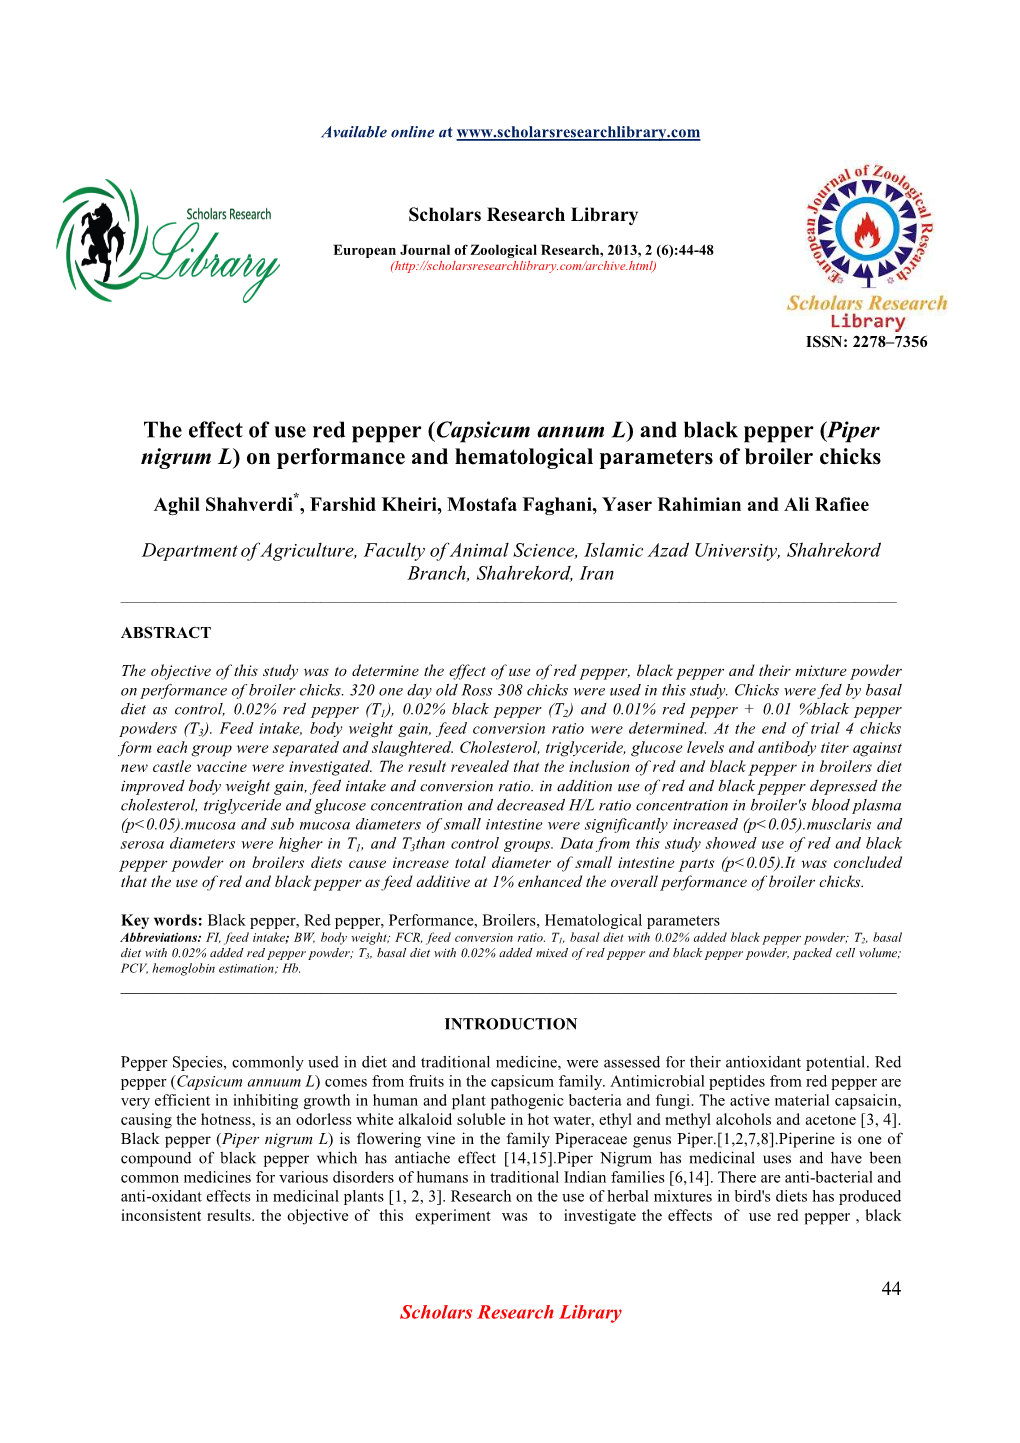 The Effect of Use Red Pepper (Capsicum Annum L) and Black Pepper (Piper Nigrum L) on Performance and Hematological Parameters Of